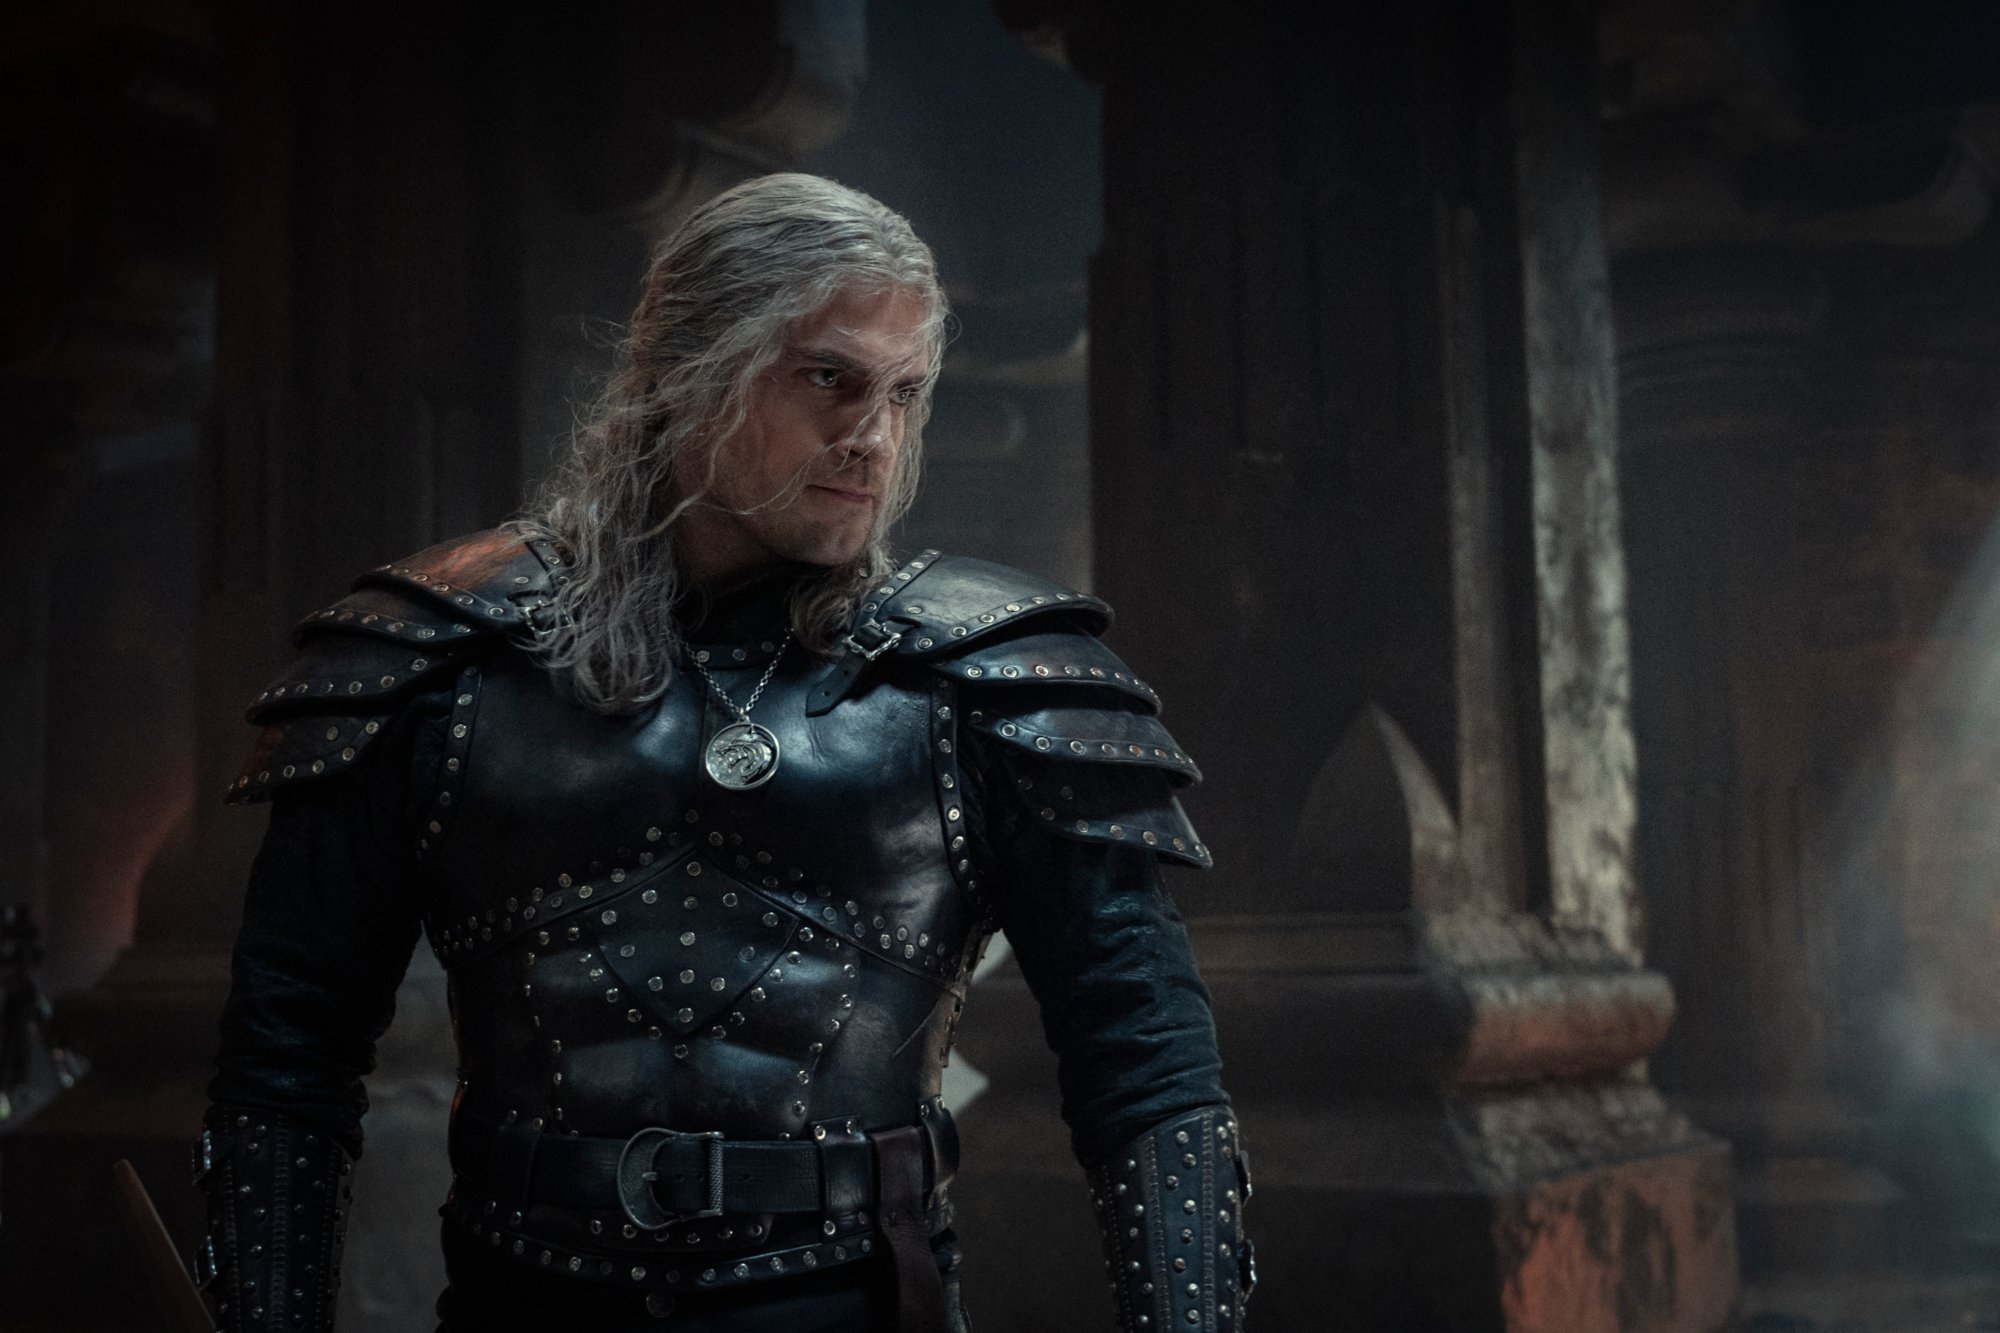 ‘The Witcher’ Creators Have a Game Plan for Season 4: ‘They’re Mapping It Out’